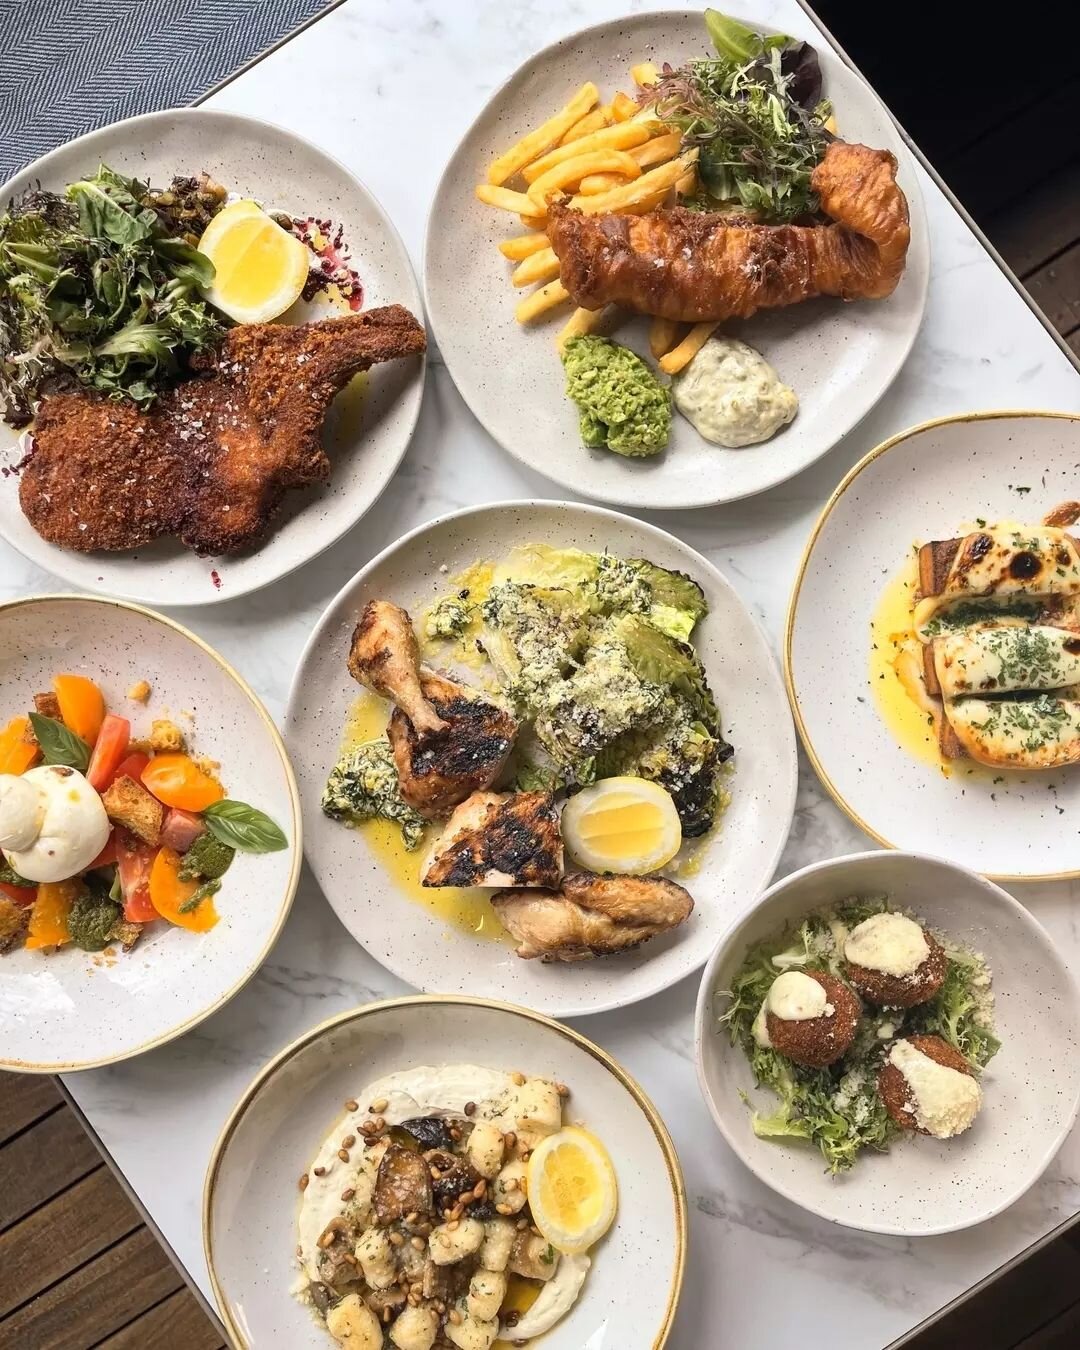 Looking for some fresh new eats in the #innerwest? Checkout our recently refreshed menu featuring:&nbsp;

⭐Half Smoked Chicken
⭐Charred Lamb Neck
⭐Ricotta Gnocchi
⭐Charcuterie Board
⭐Hand-tied Burrata&nbsp;

Available for Lunch &amp; Dinner from 12PM